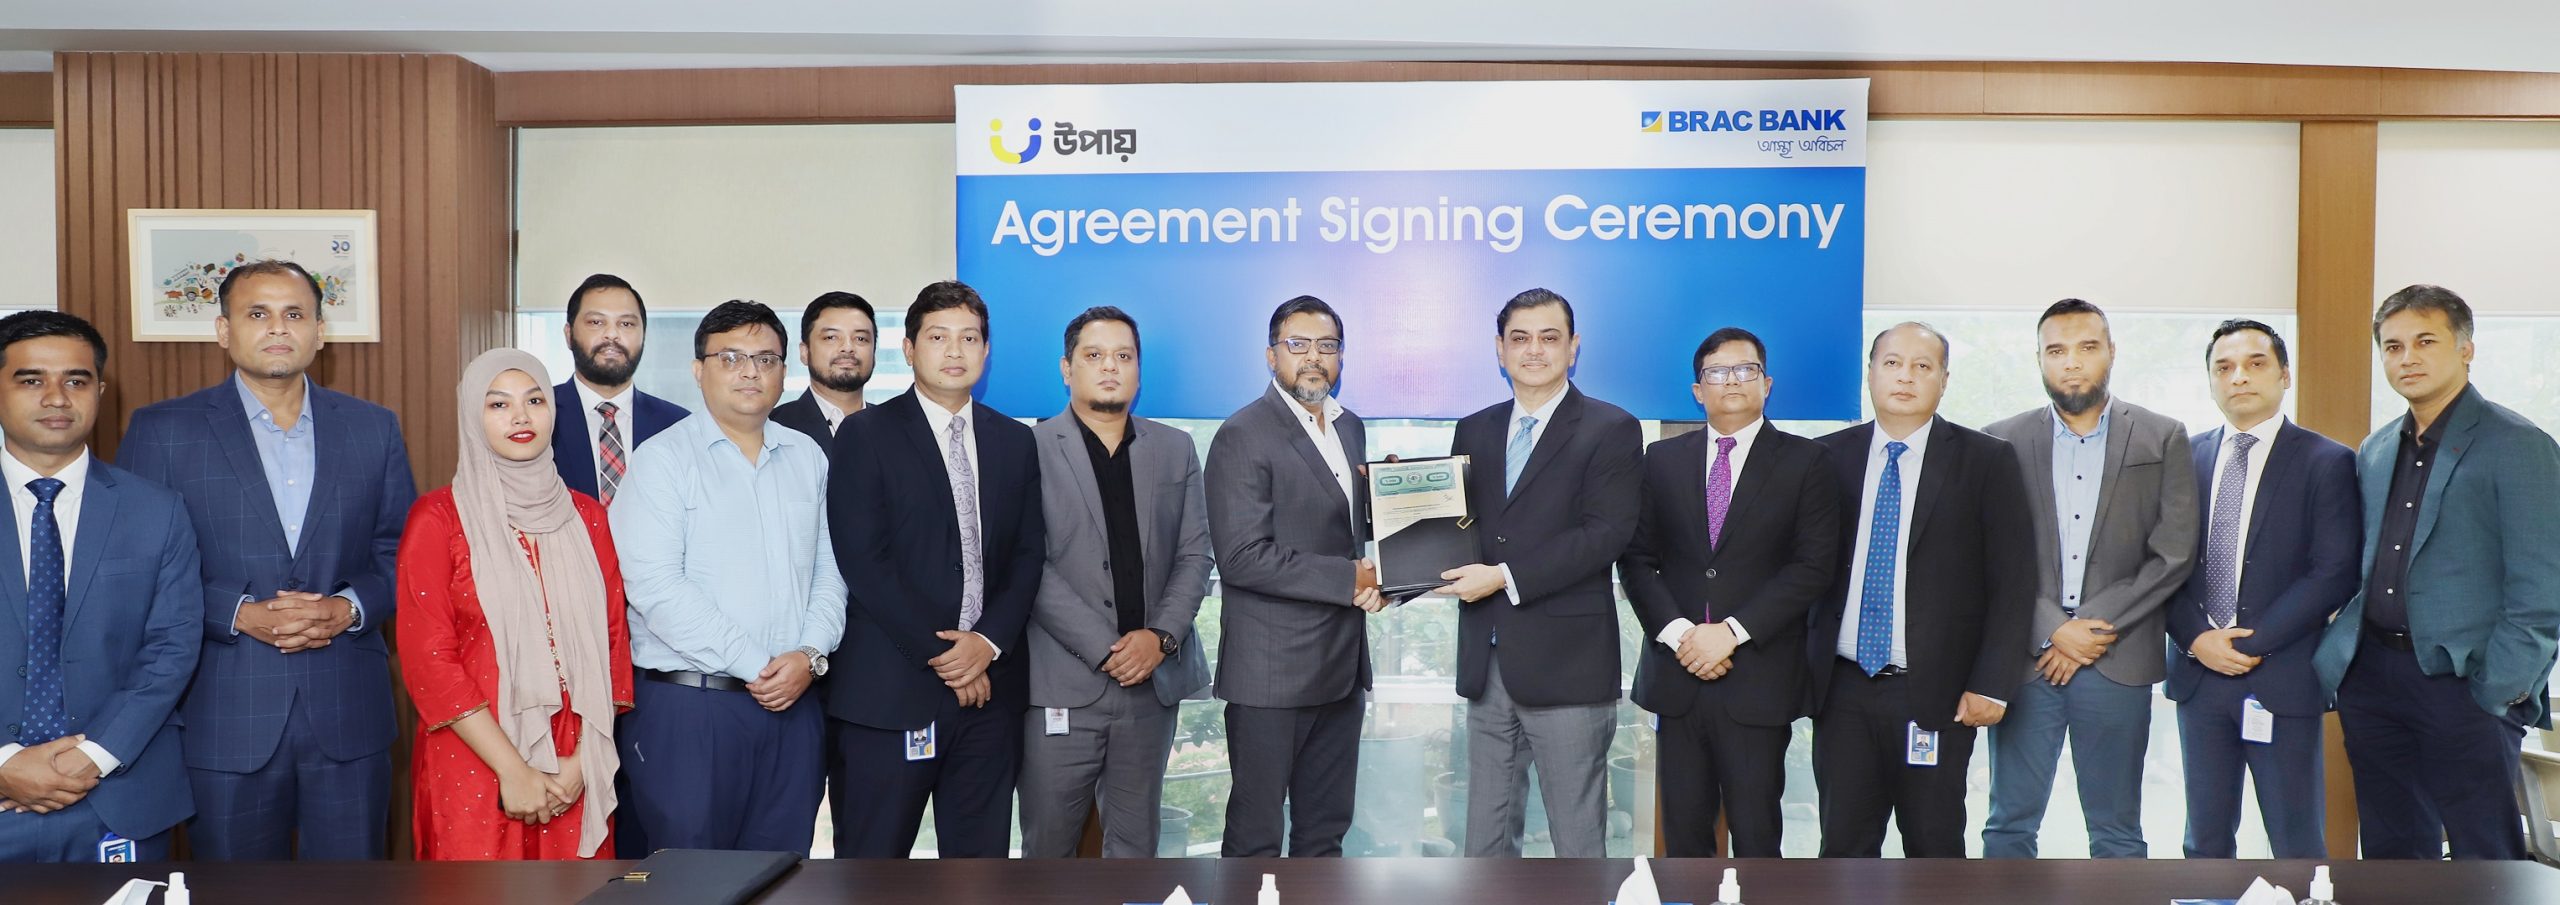 BRAC Bank, Upay Sign Deal on Fund Transfer and Remittance Services